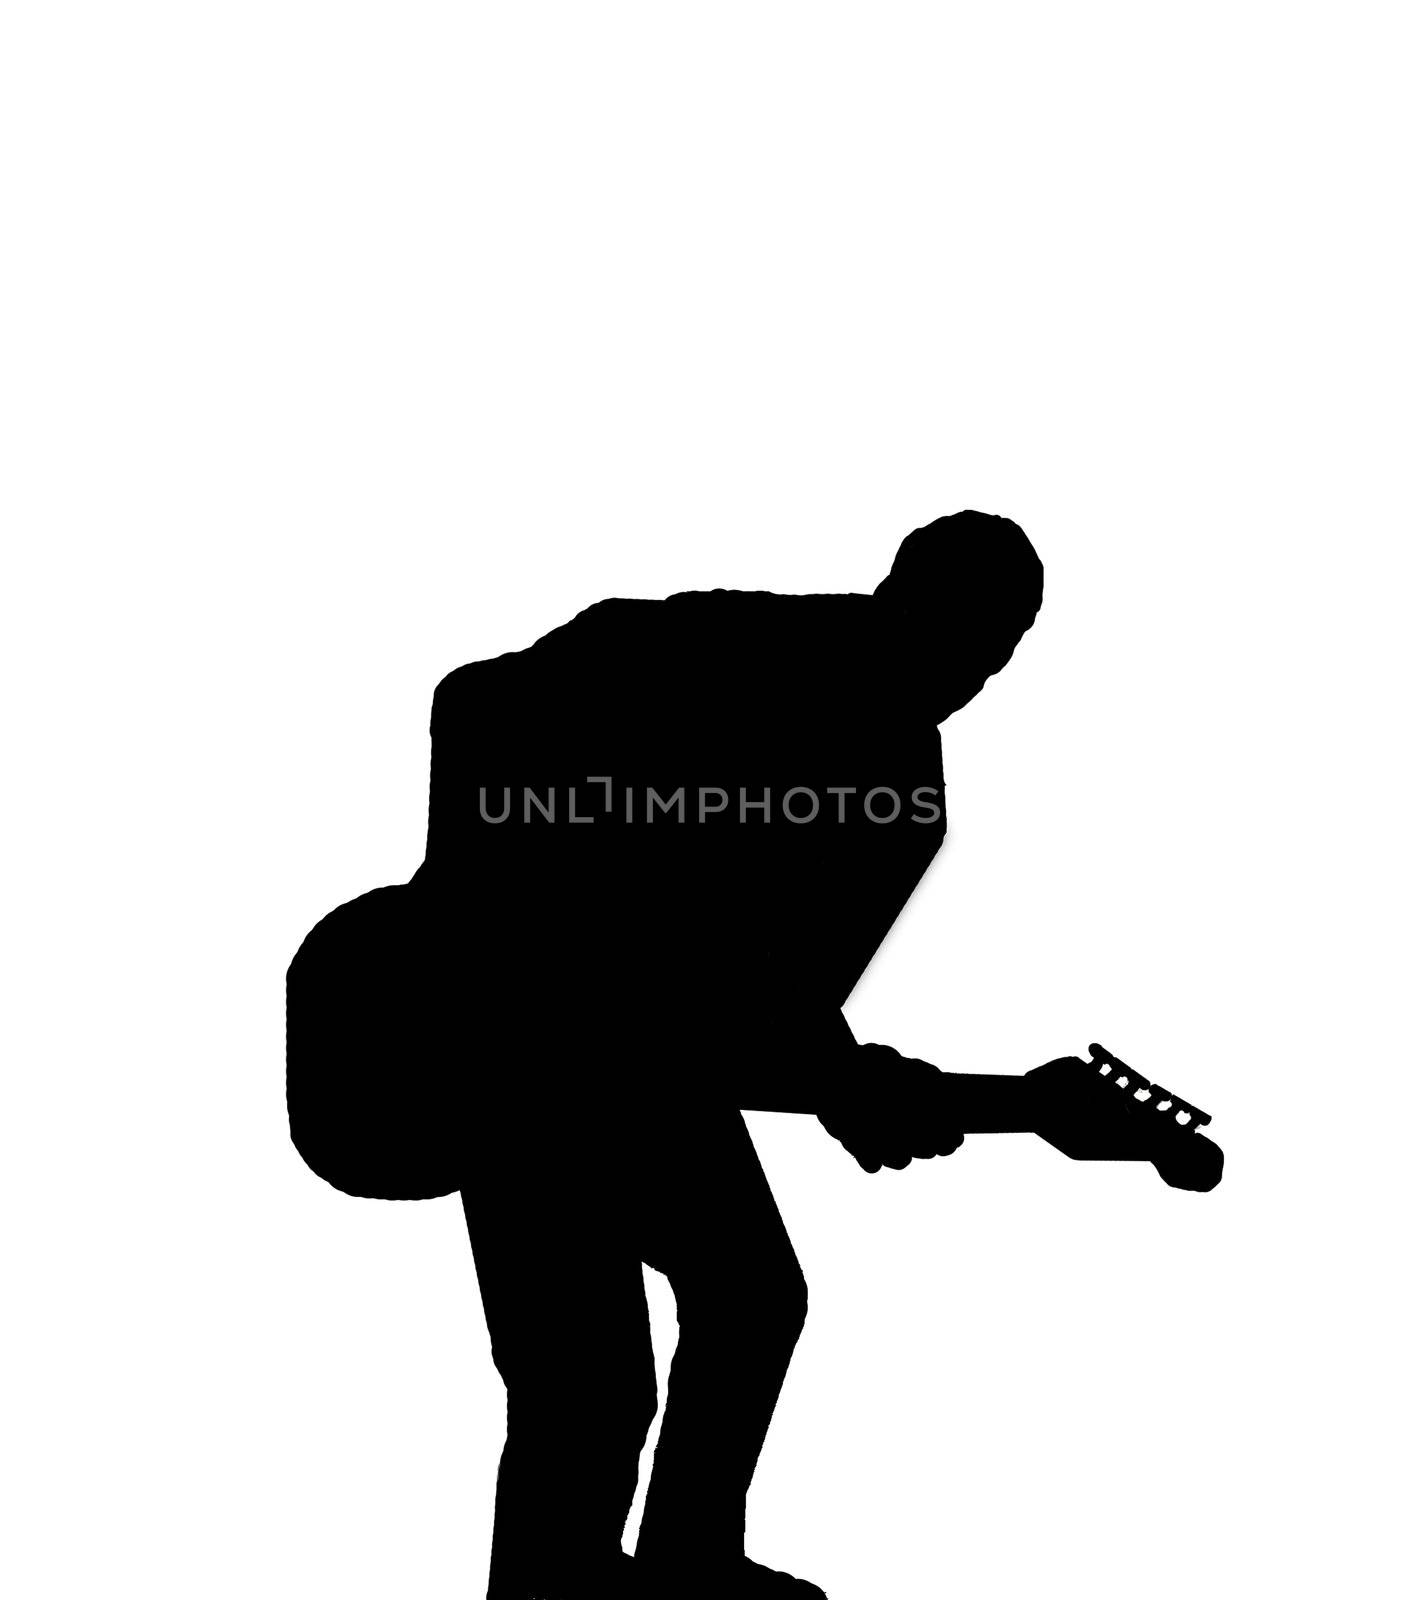 Black silhouette of guitarist on white background